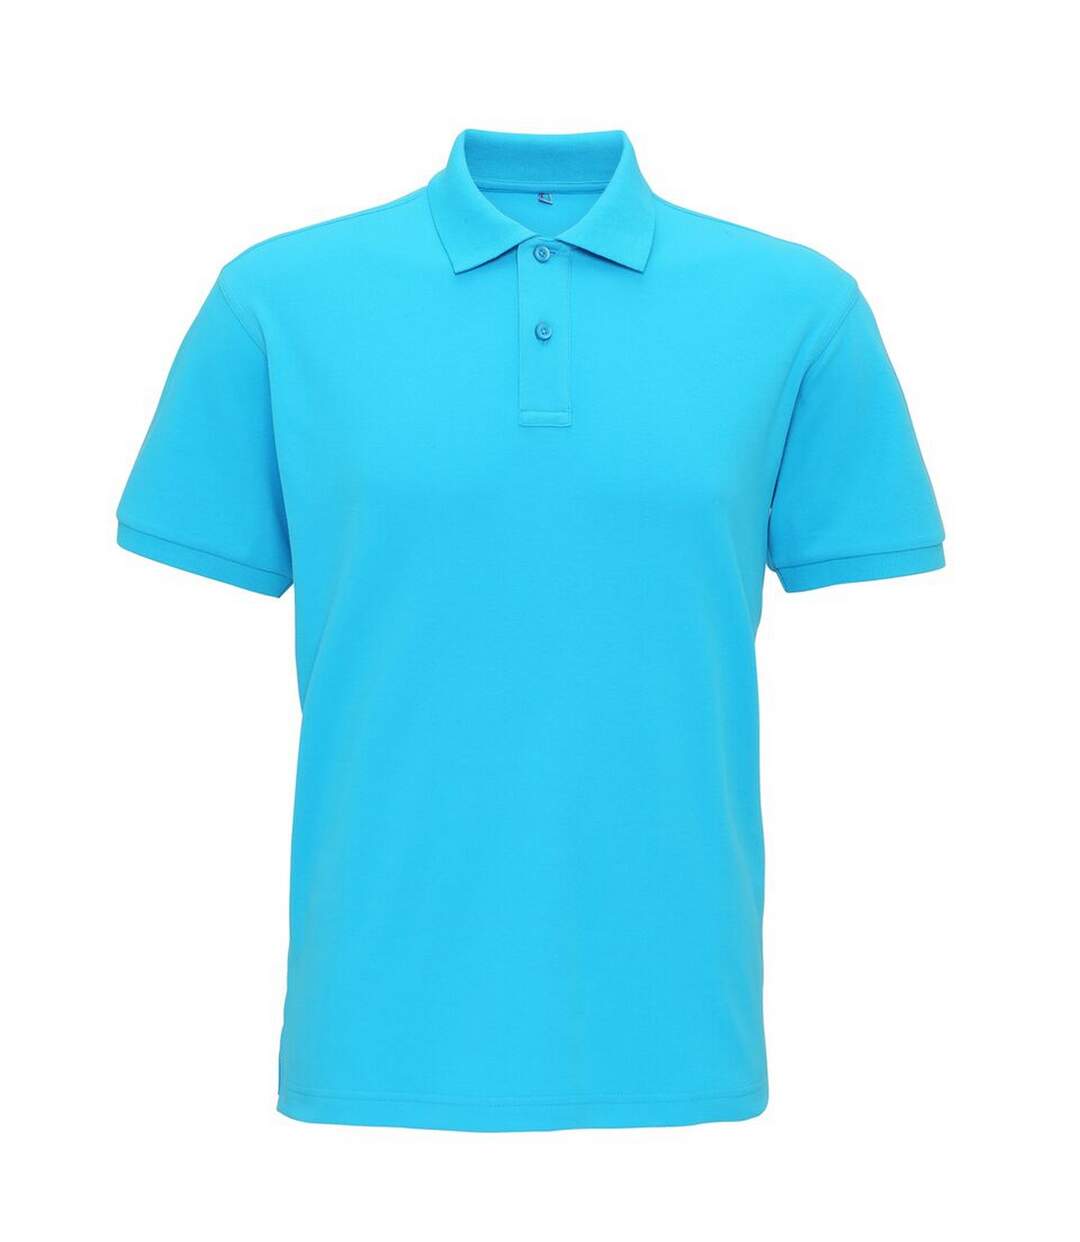 Asquith & Fox Mens Super Smooth Knit Polo Shirt (Turquoise)